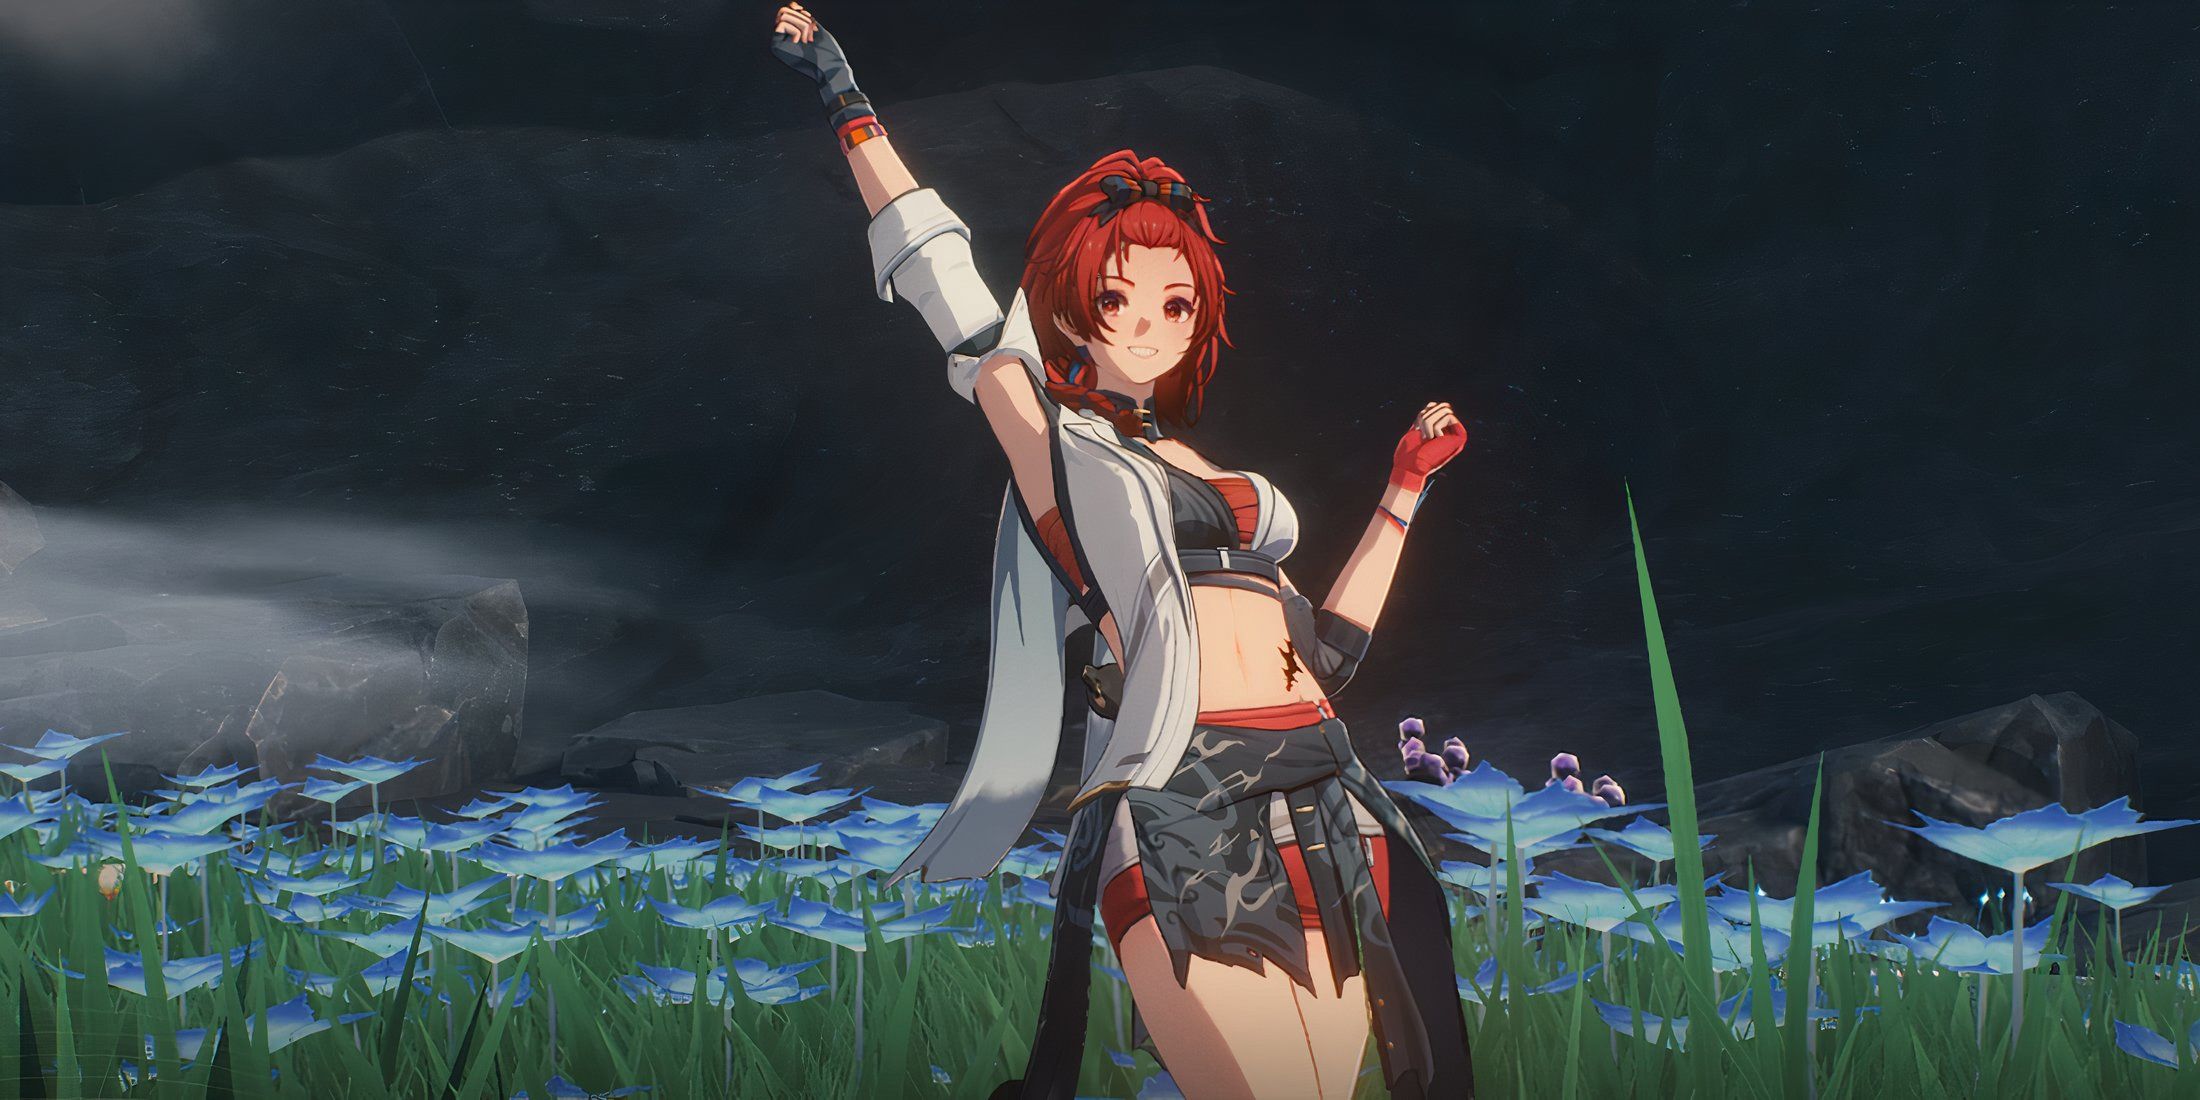 Chixia's idle pose in Wuthering Waves